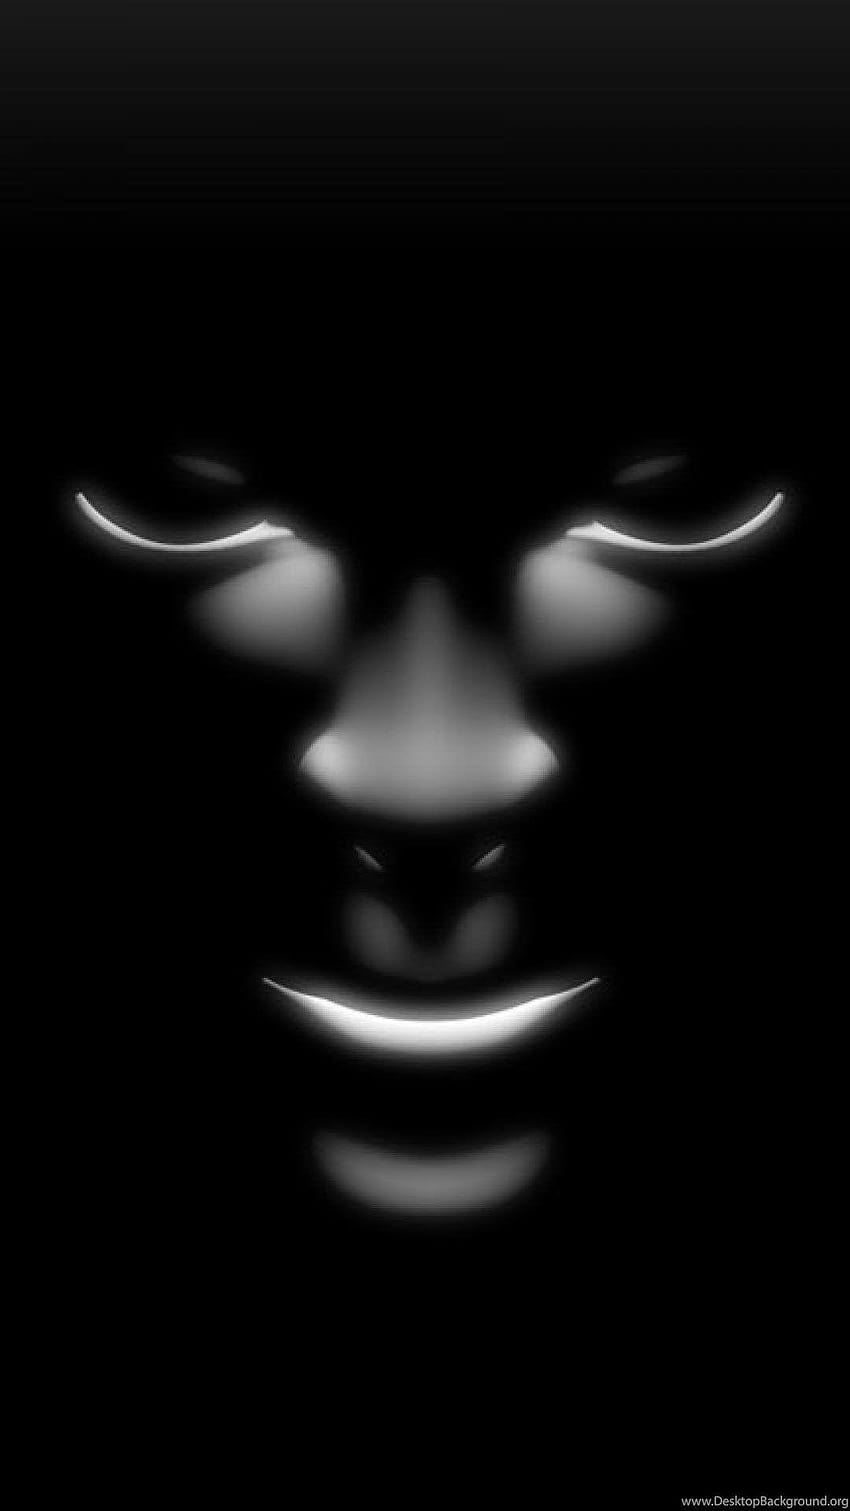 Scary Faces Backgrounds, scary mobile HD phone wallpaper